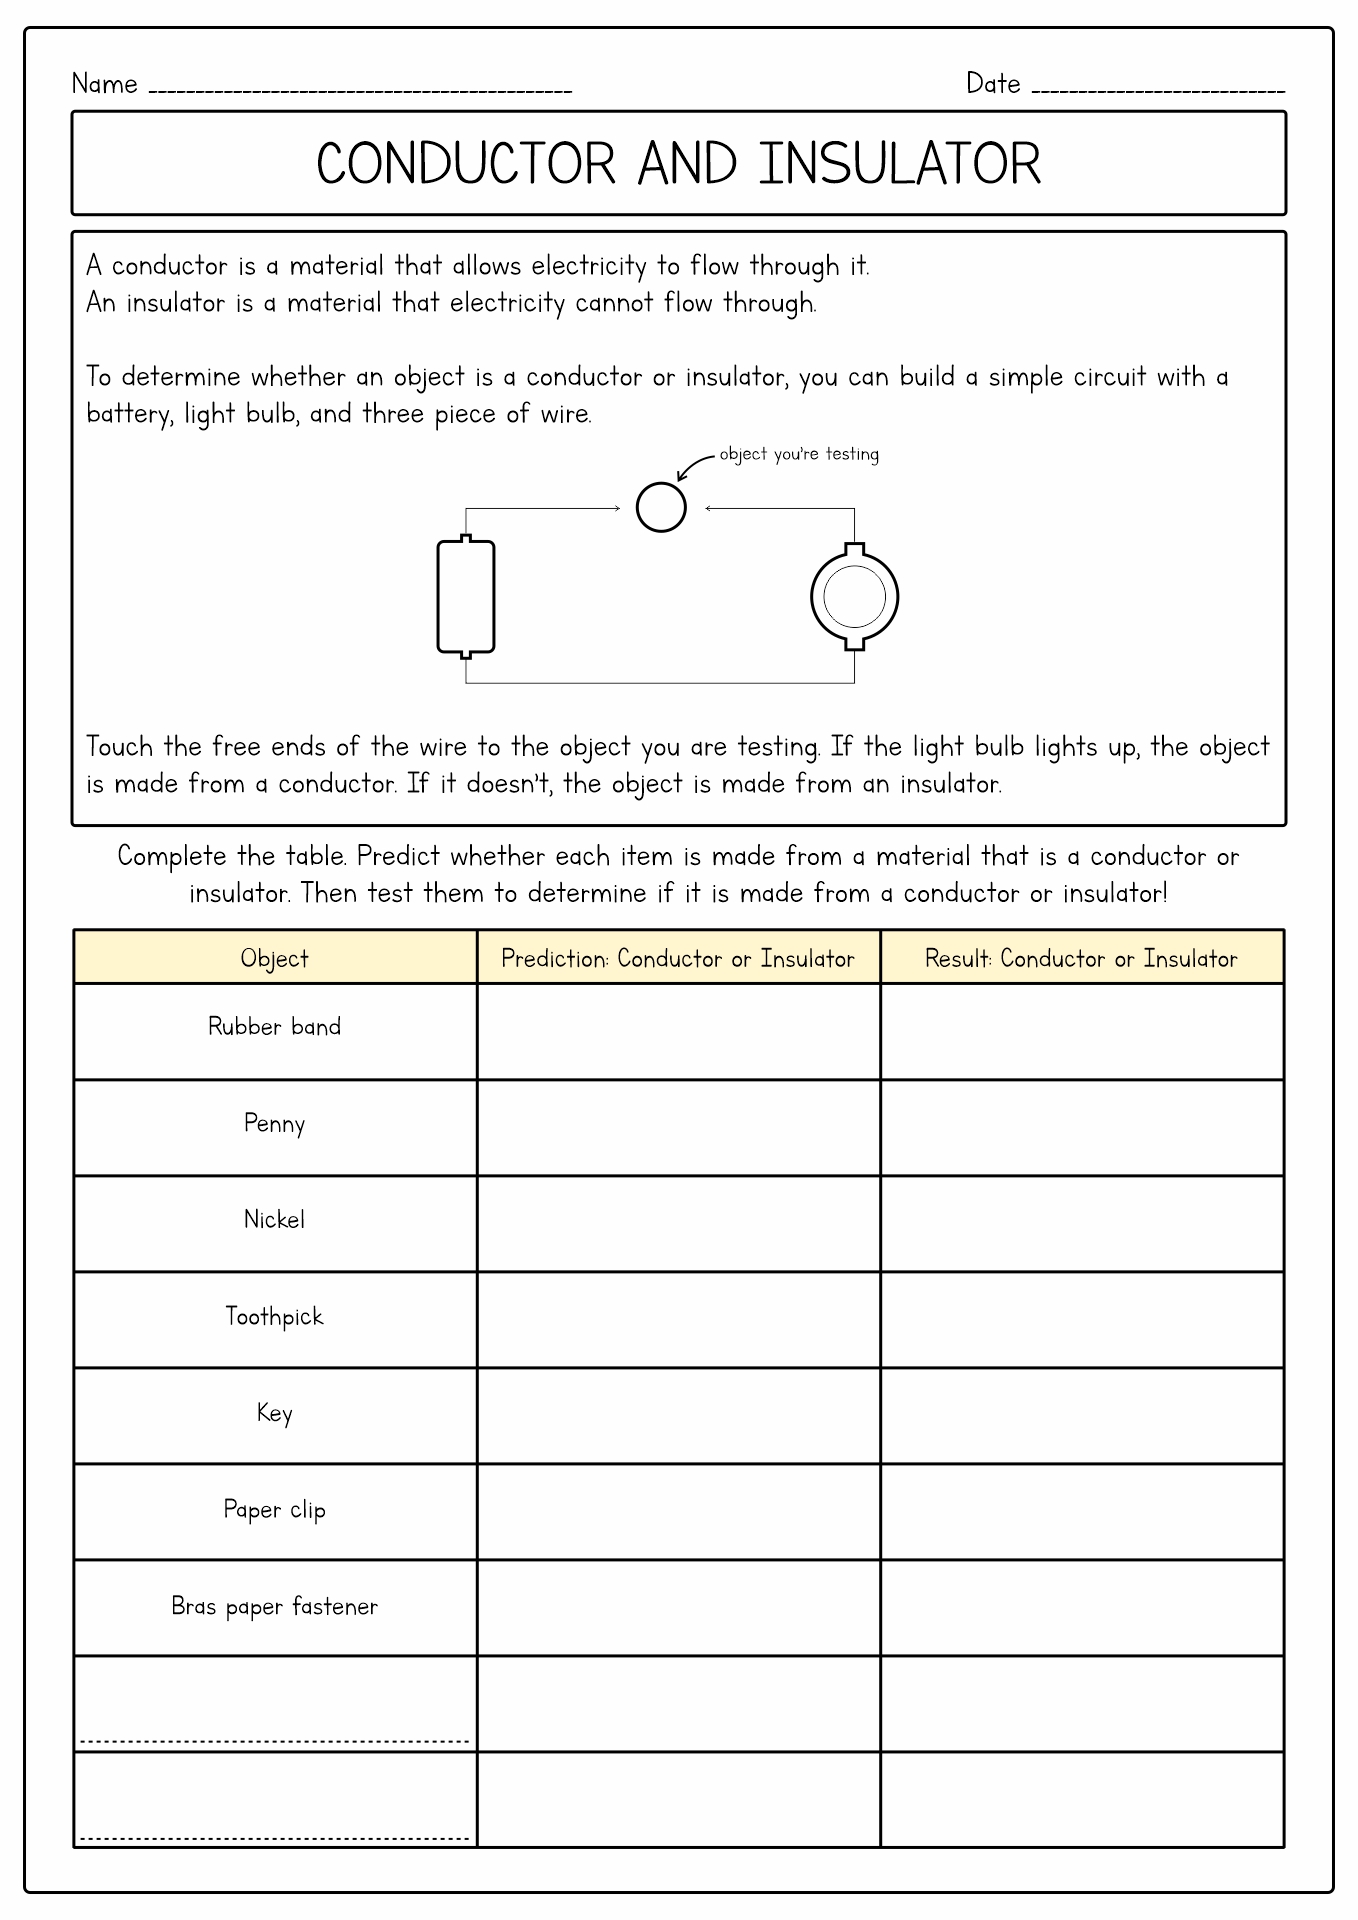 Science Electricity Worksheets 4th Grade Image